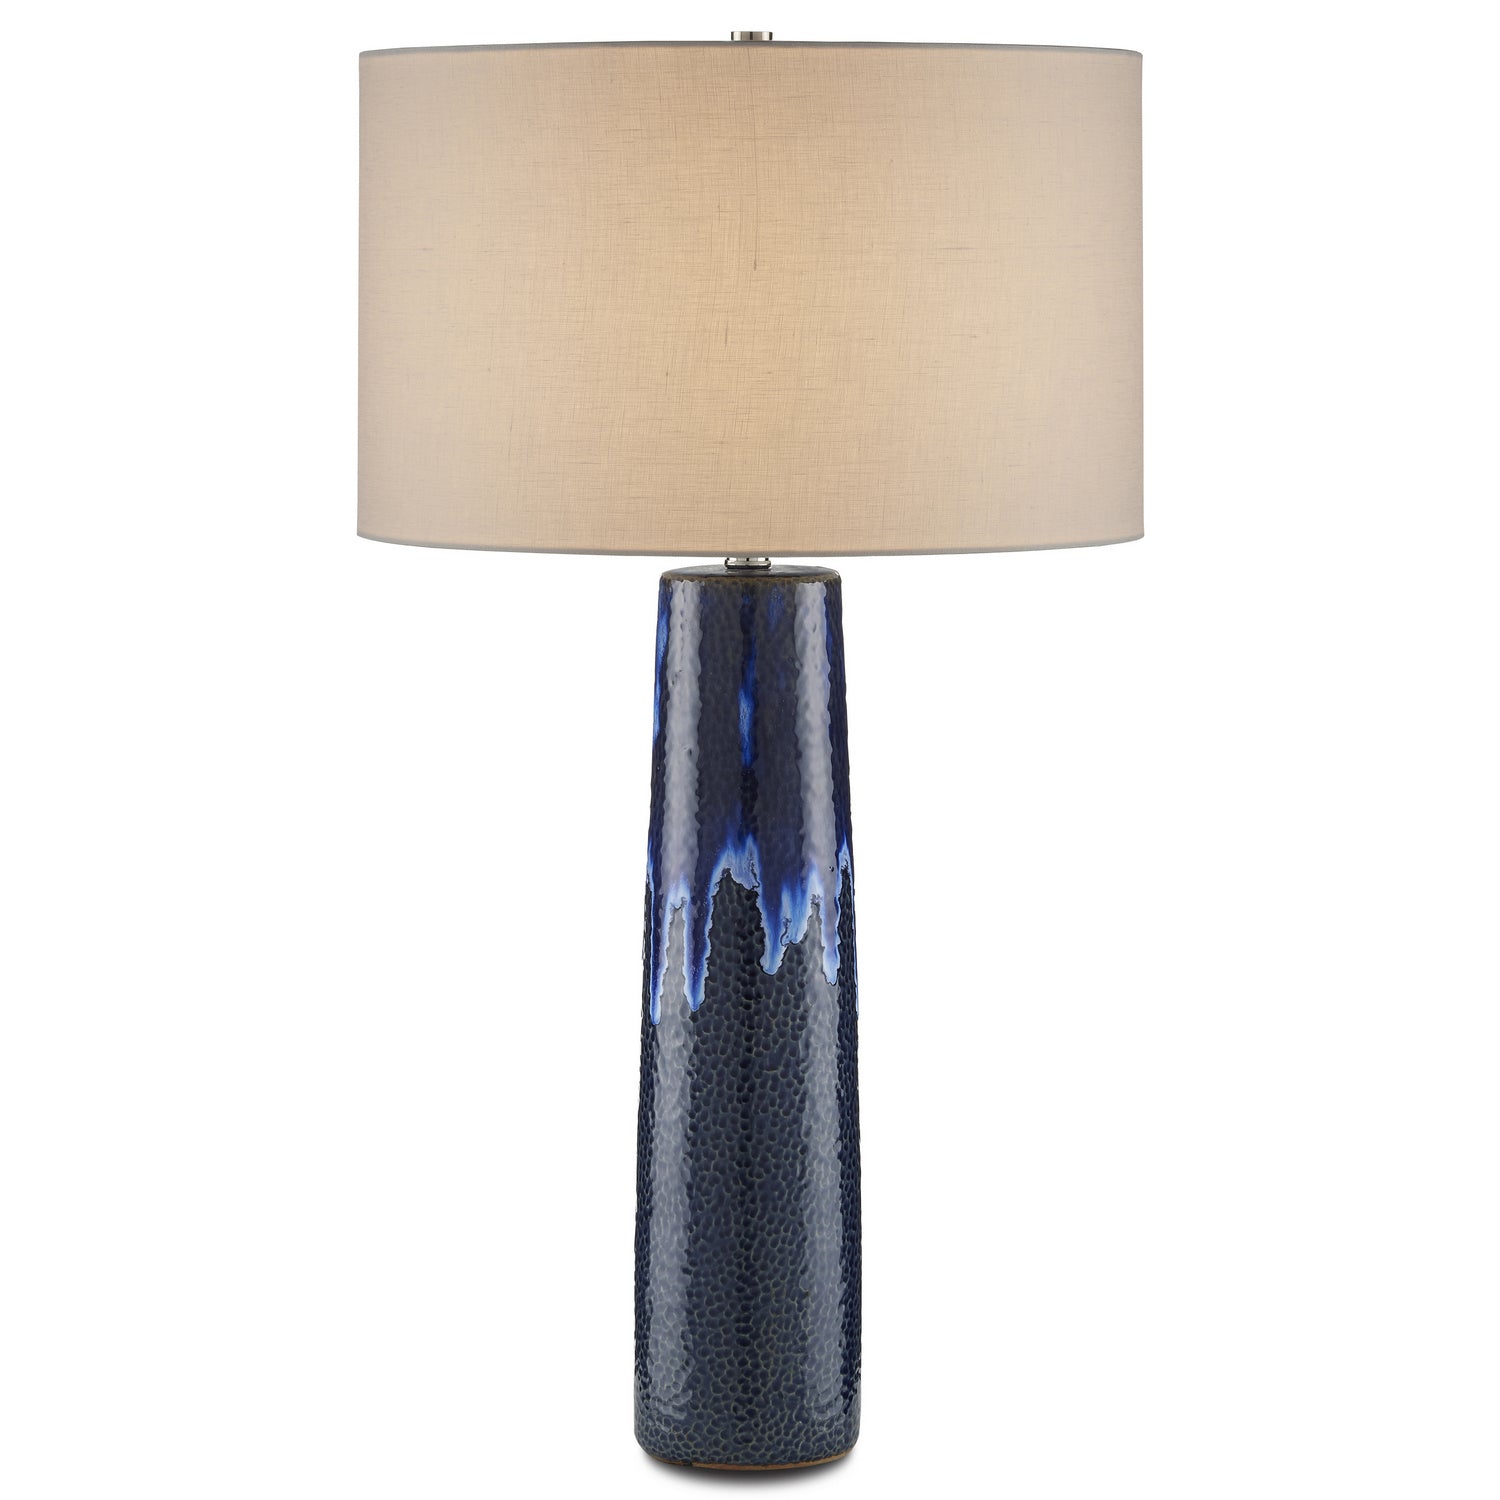 One Light Table Lamp from the Kelmscott collection in Reactive Blue finish